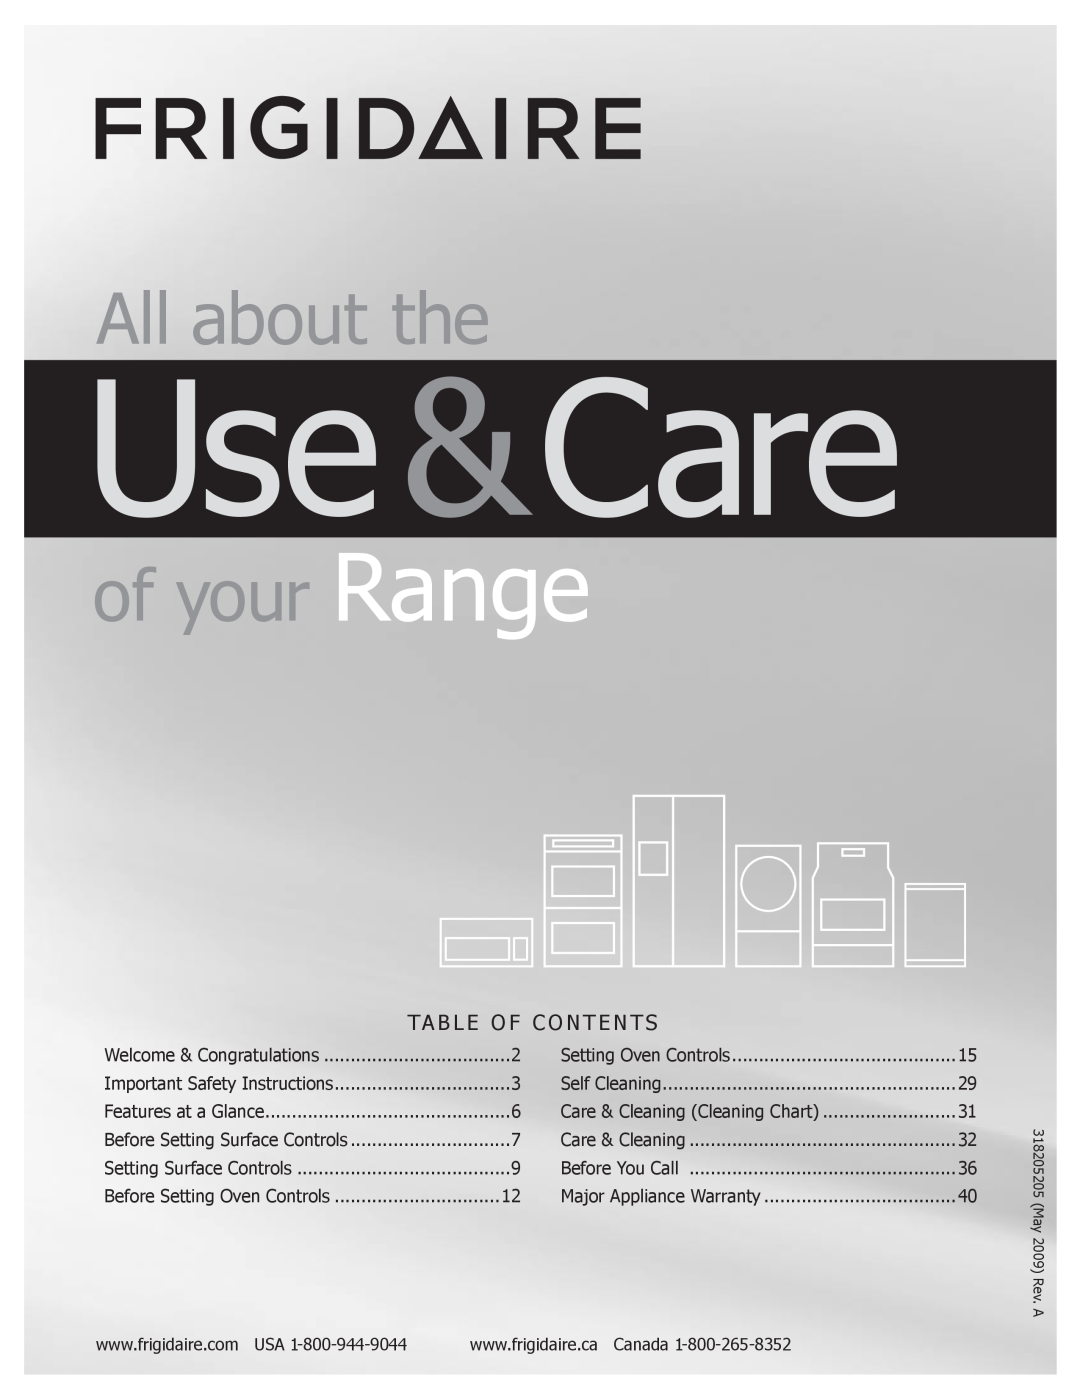 Frigidaire 318205205 manual Use &Care, All about the, of your Range, Ta B L E O F C O N T E N T S, May 2009 Rev. A 